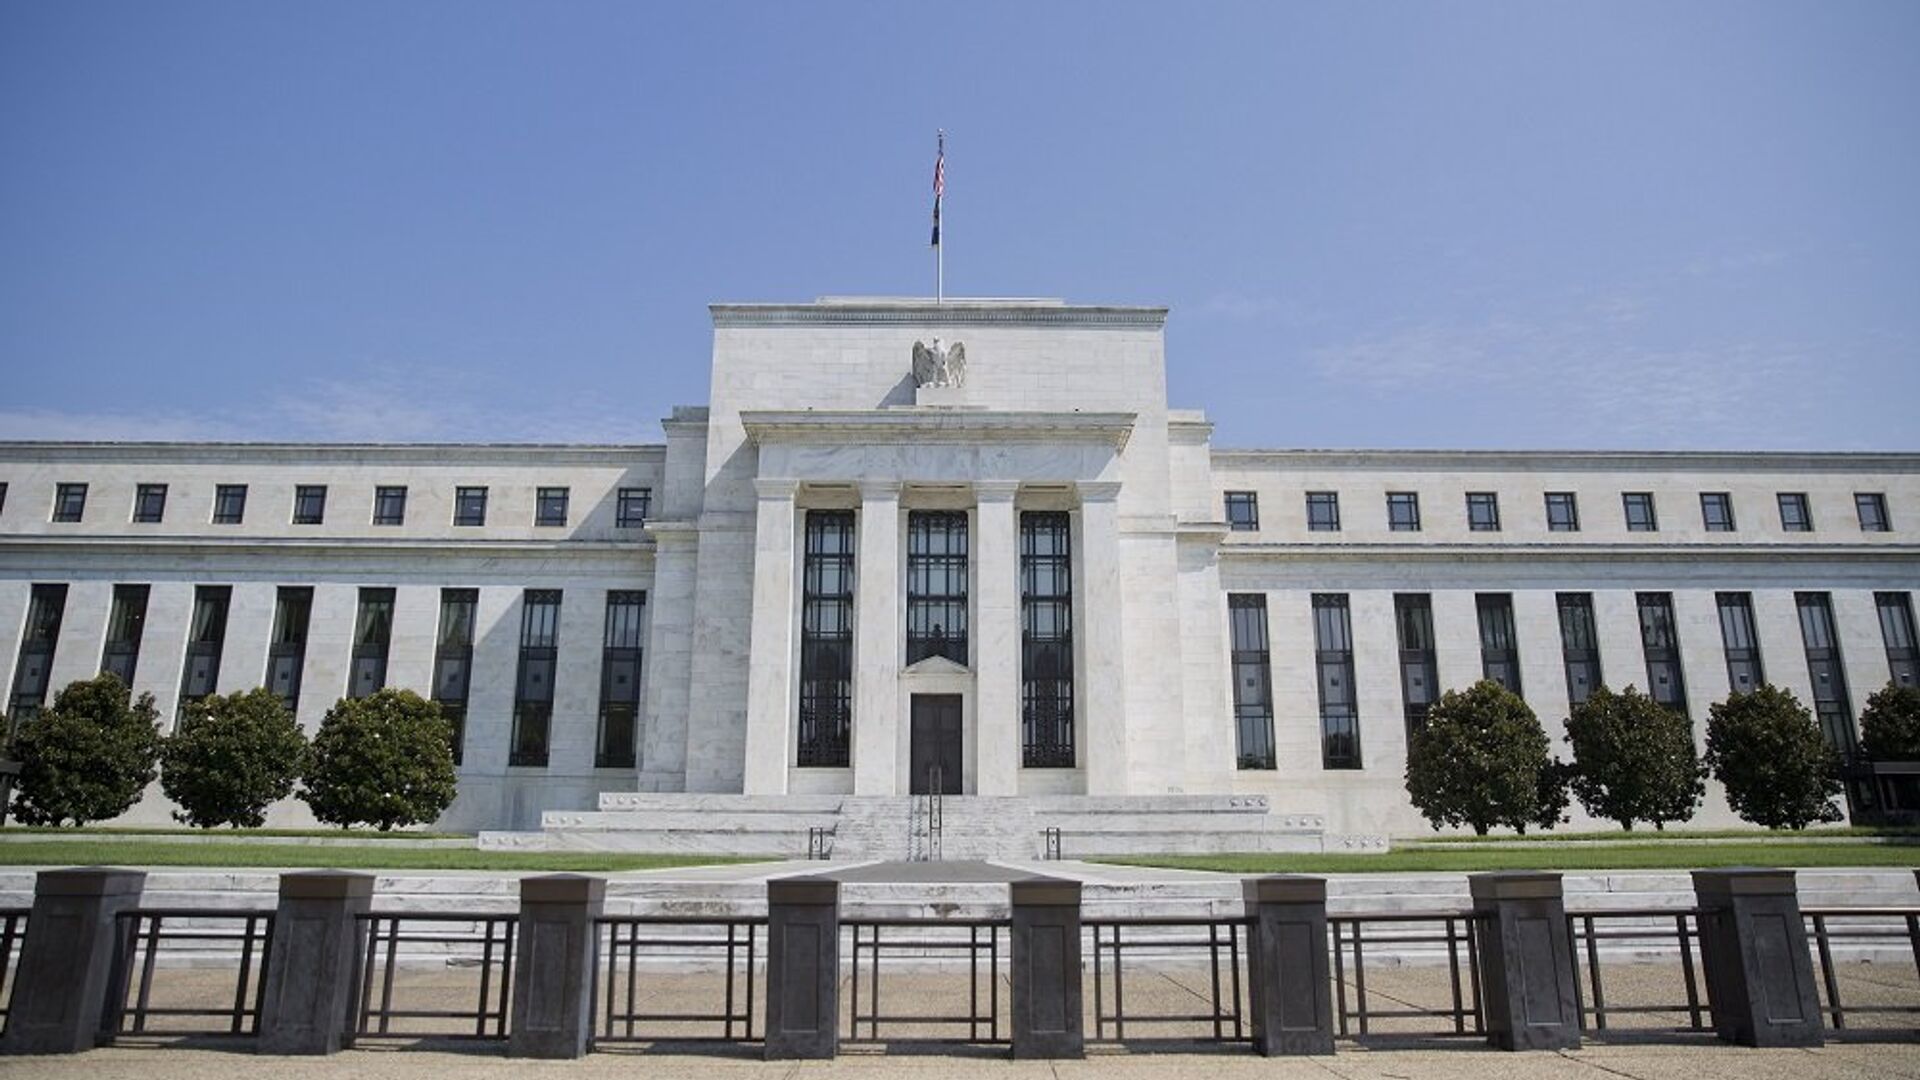 Fed: U.S. financial system faces rising business and personal loan delinquencies